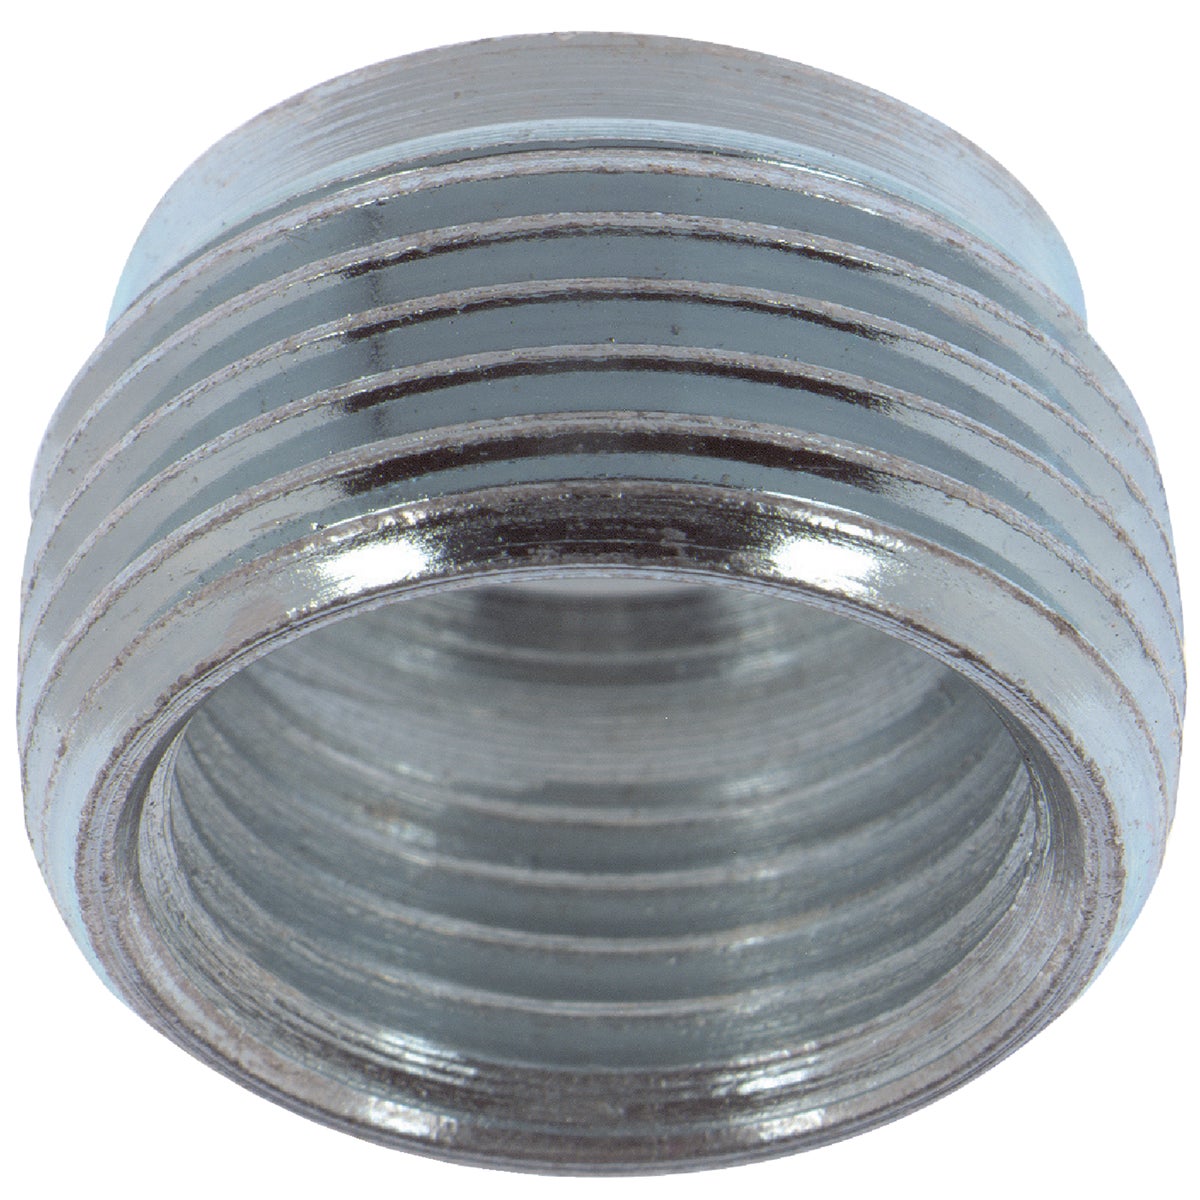 Item 502278, Bushing used to reduce the entry size of rigid threaded conduit to permit 